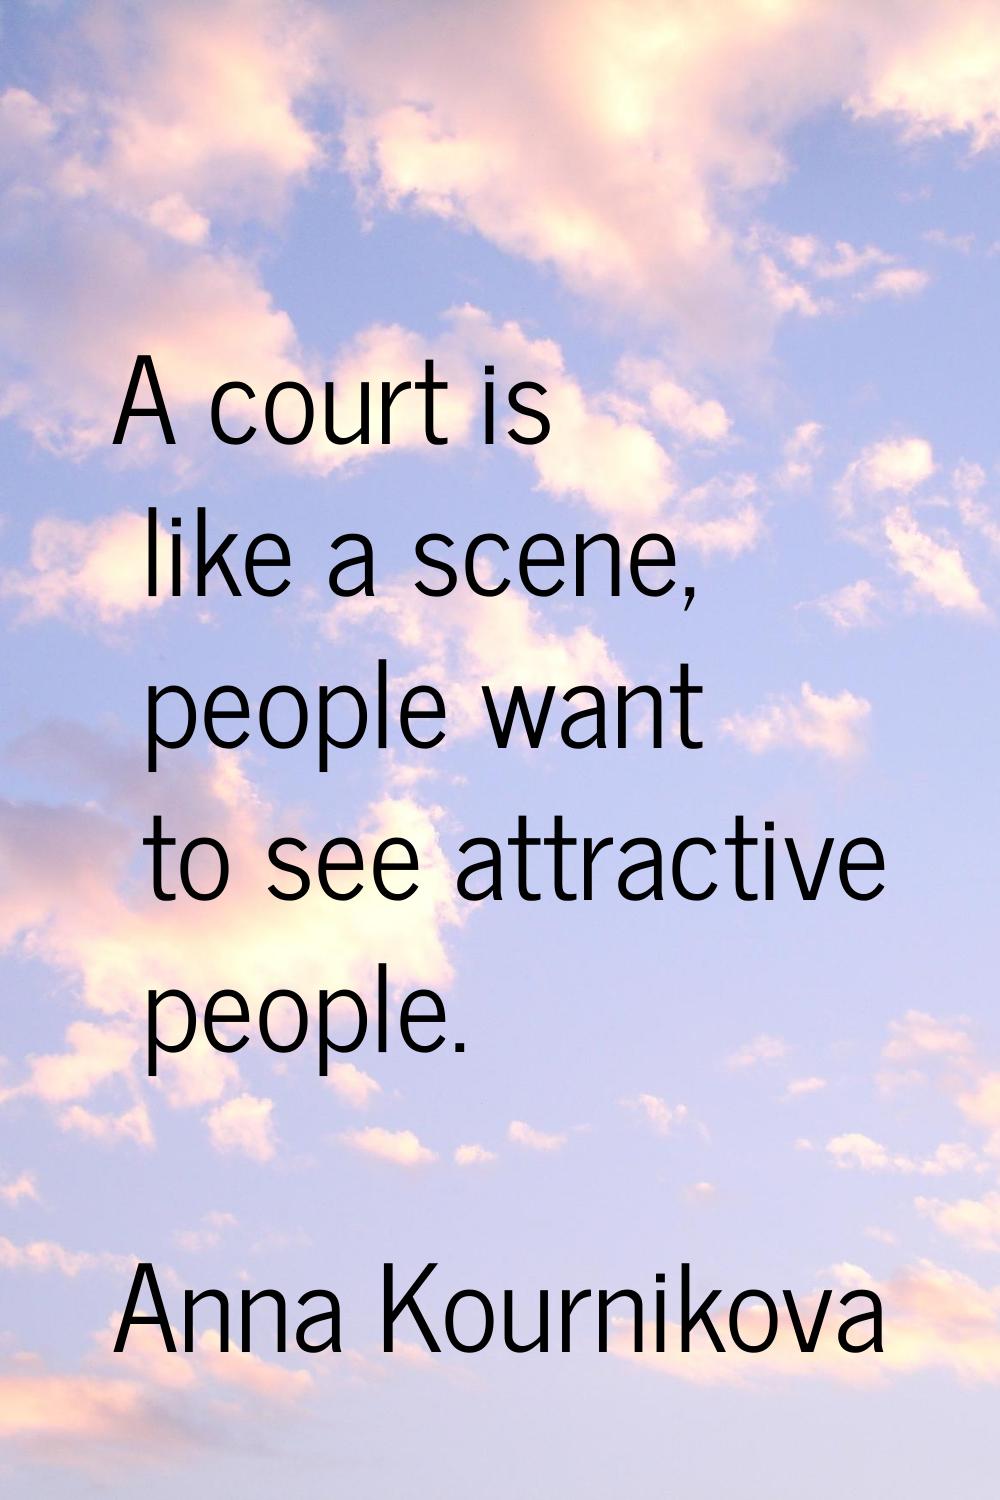 A court is like a scene, people want to see attractive people.